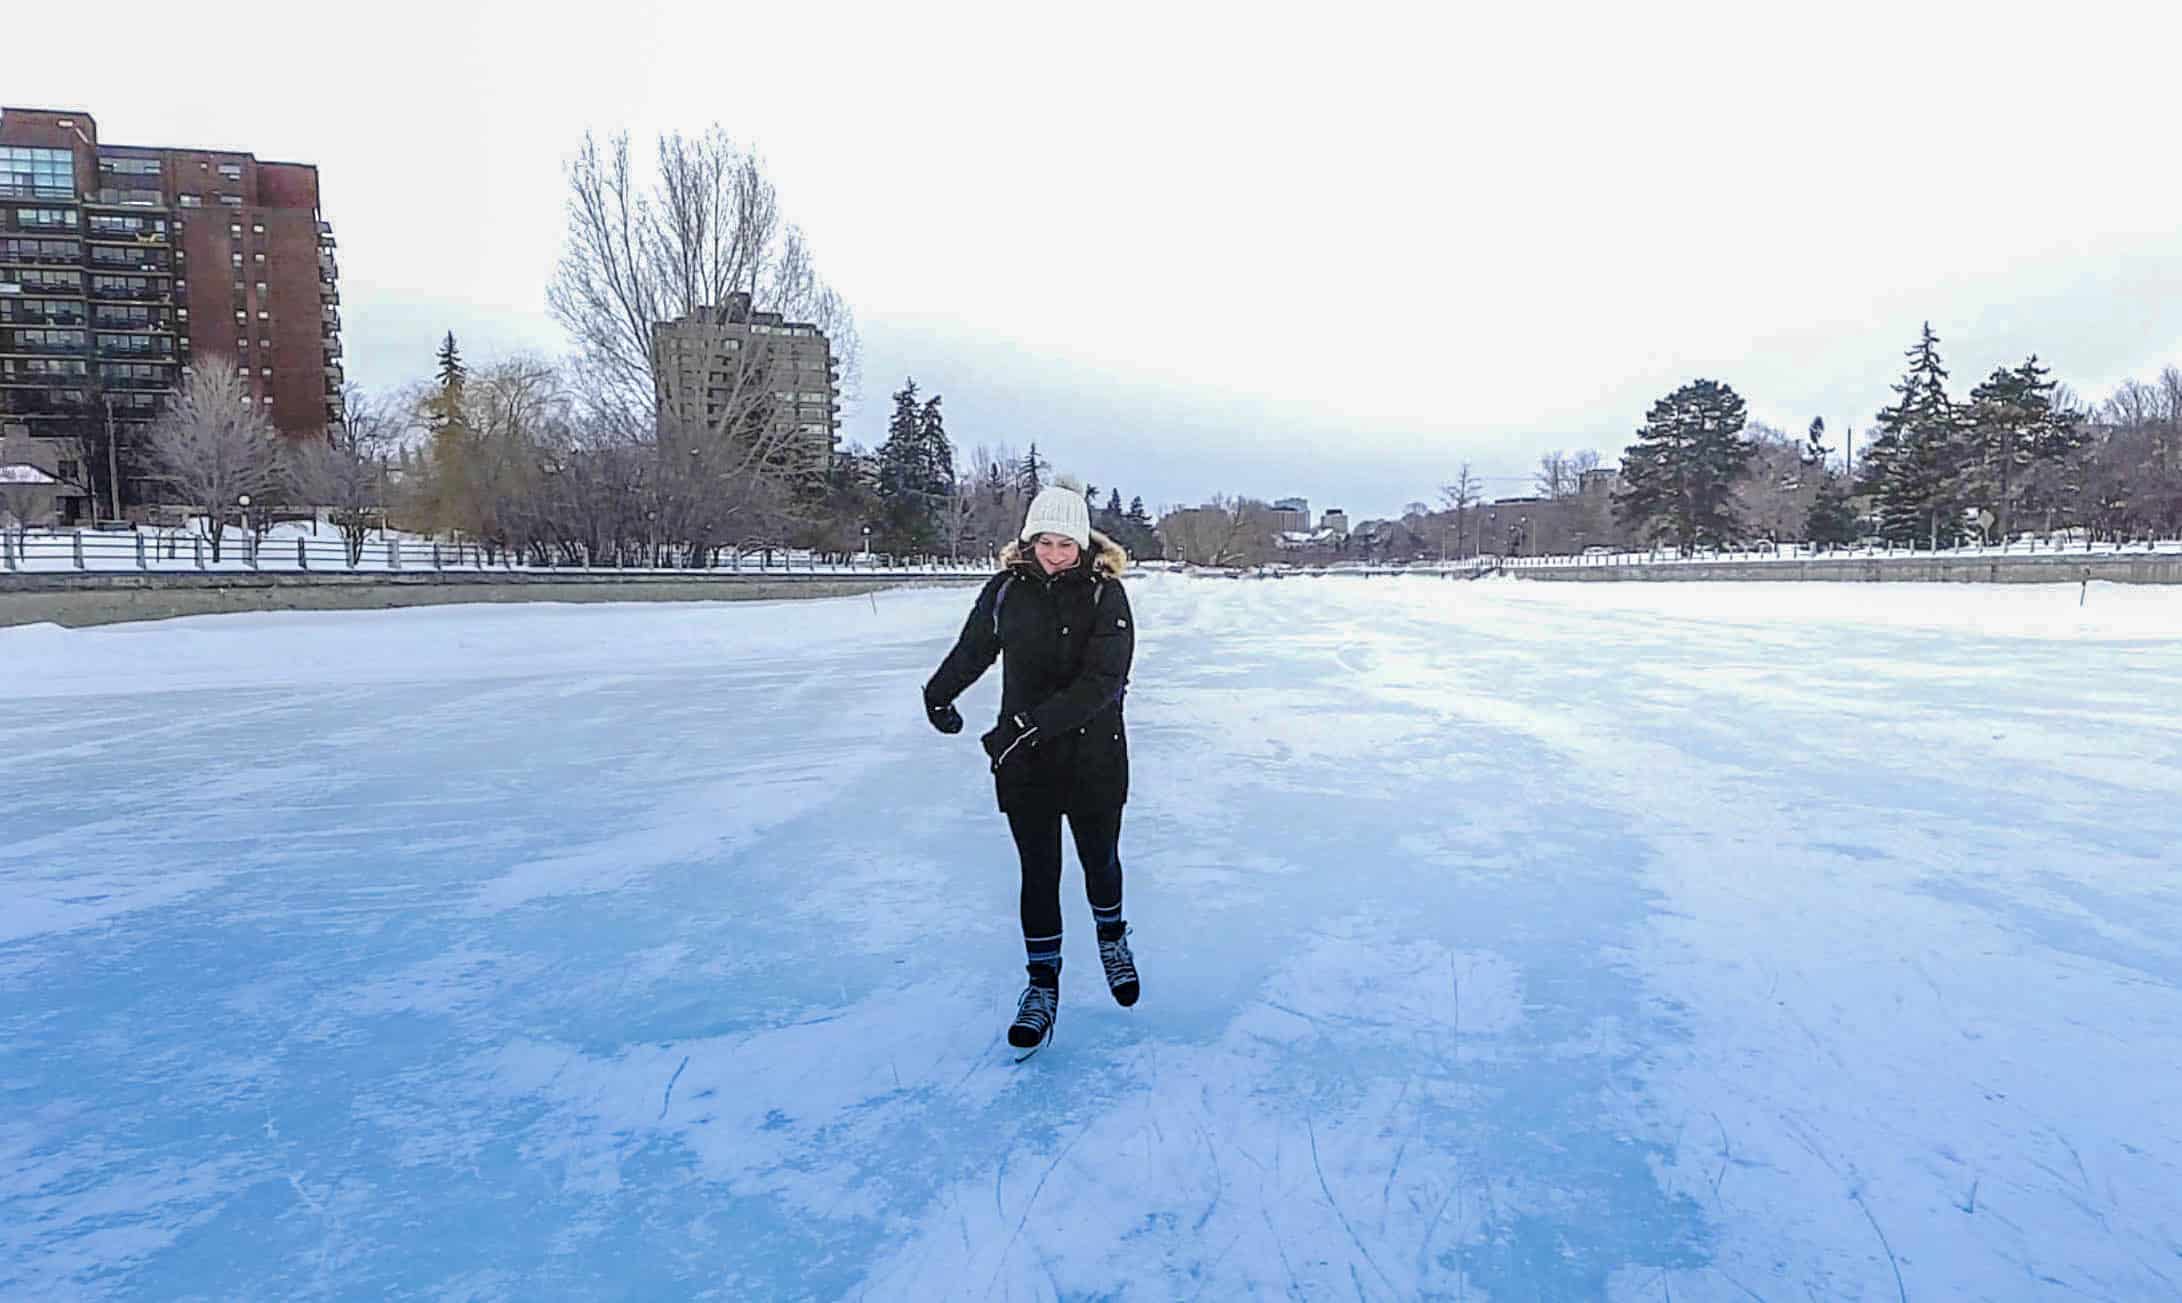 Skating on the Rideau Canal is one of the things to do in Ottawa